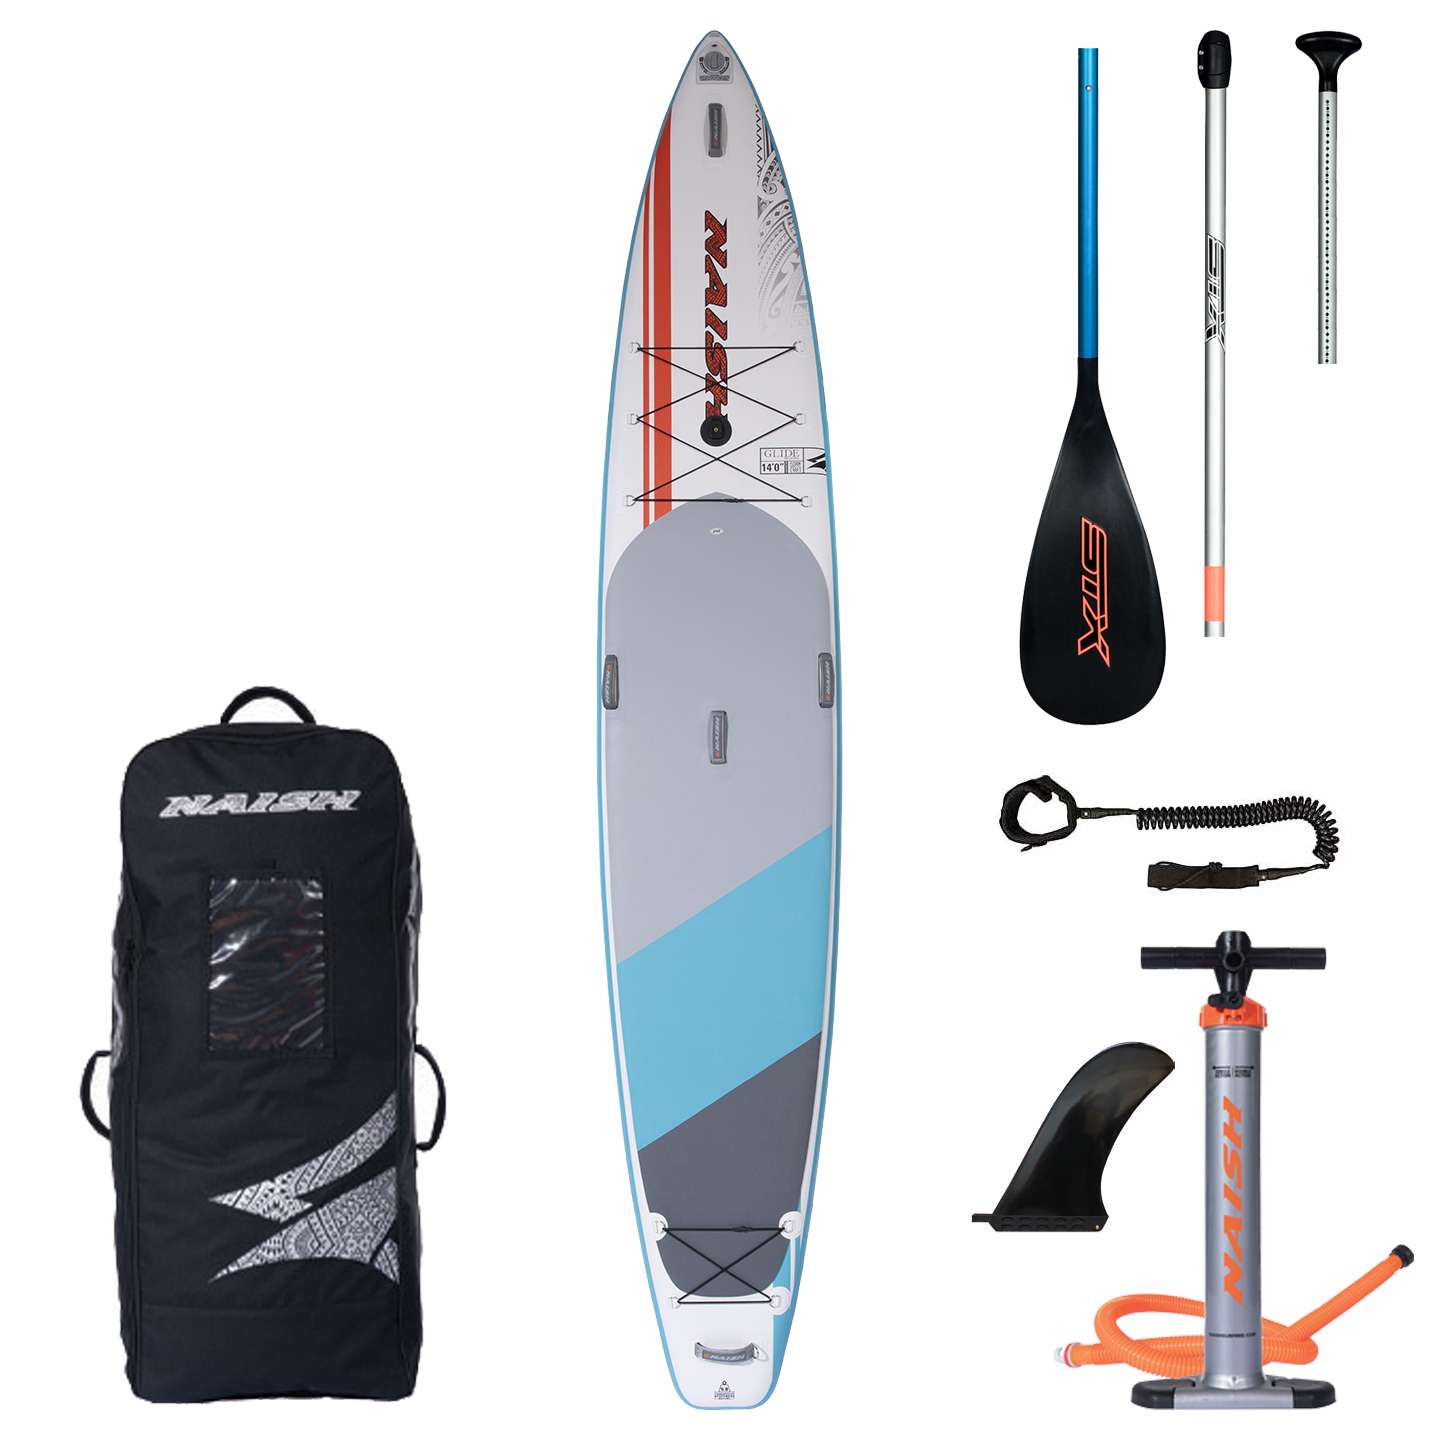 Naish Glide 14'0 S25 Inflatable SUP Board | King of Watersports